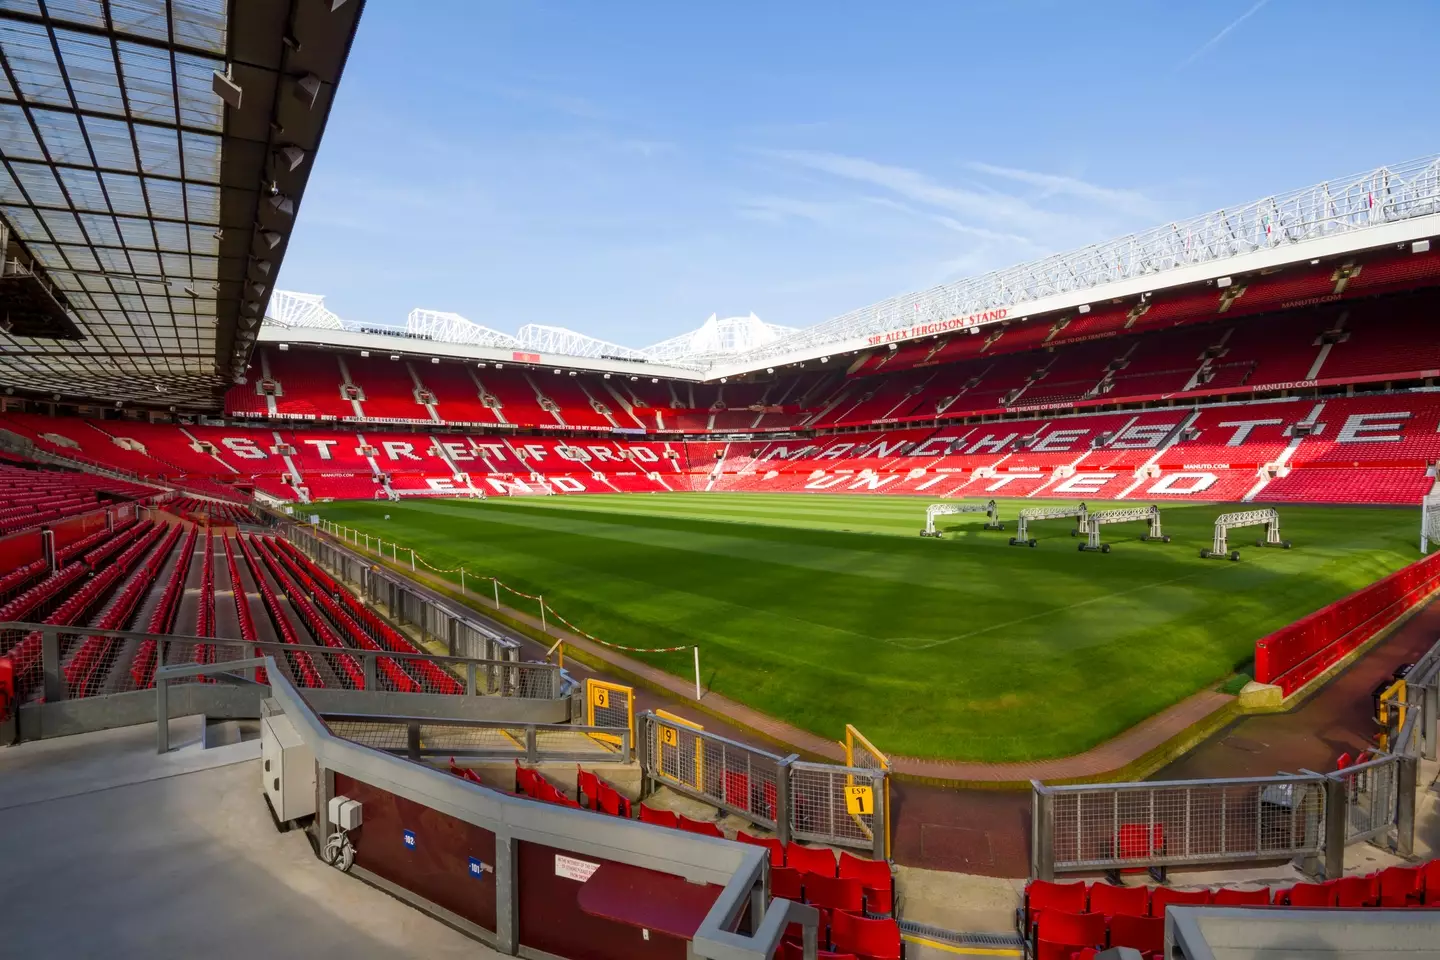 Old Trafford could soon have a new owner. Image: Alamy